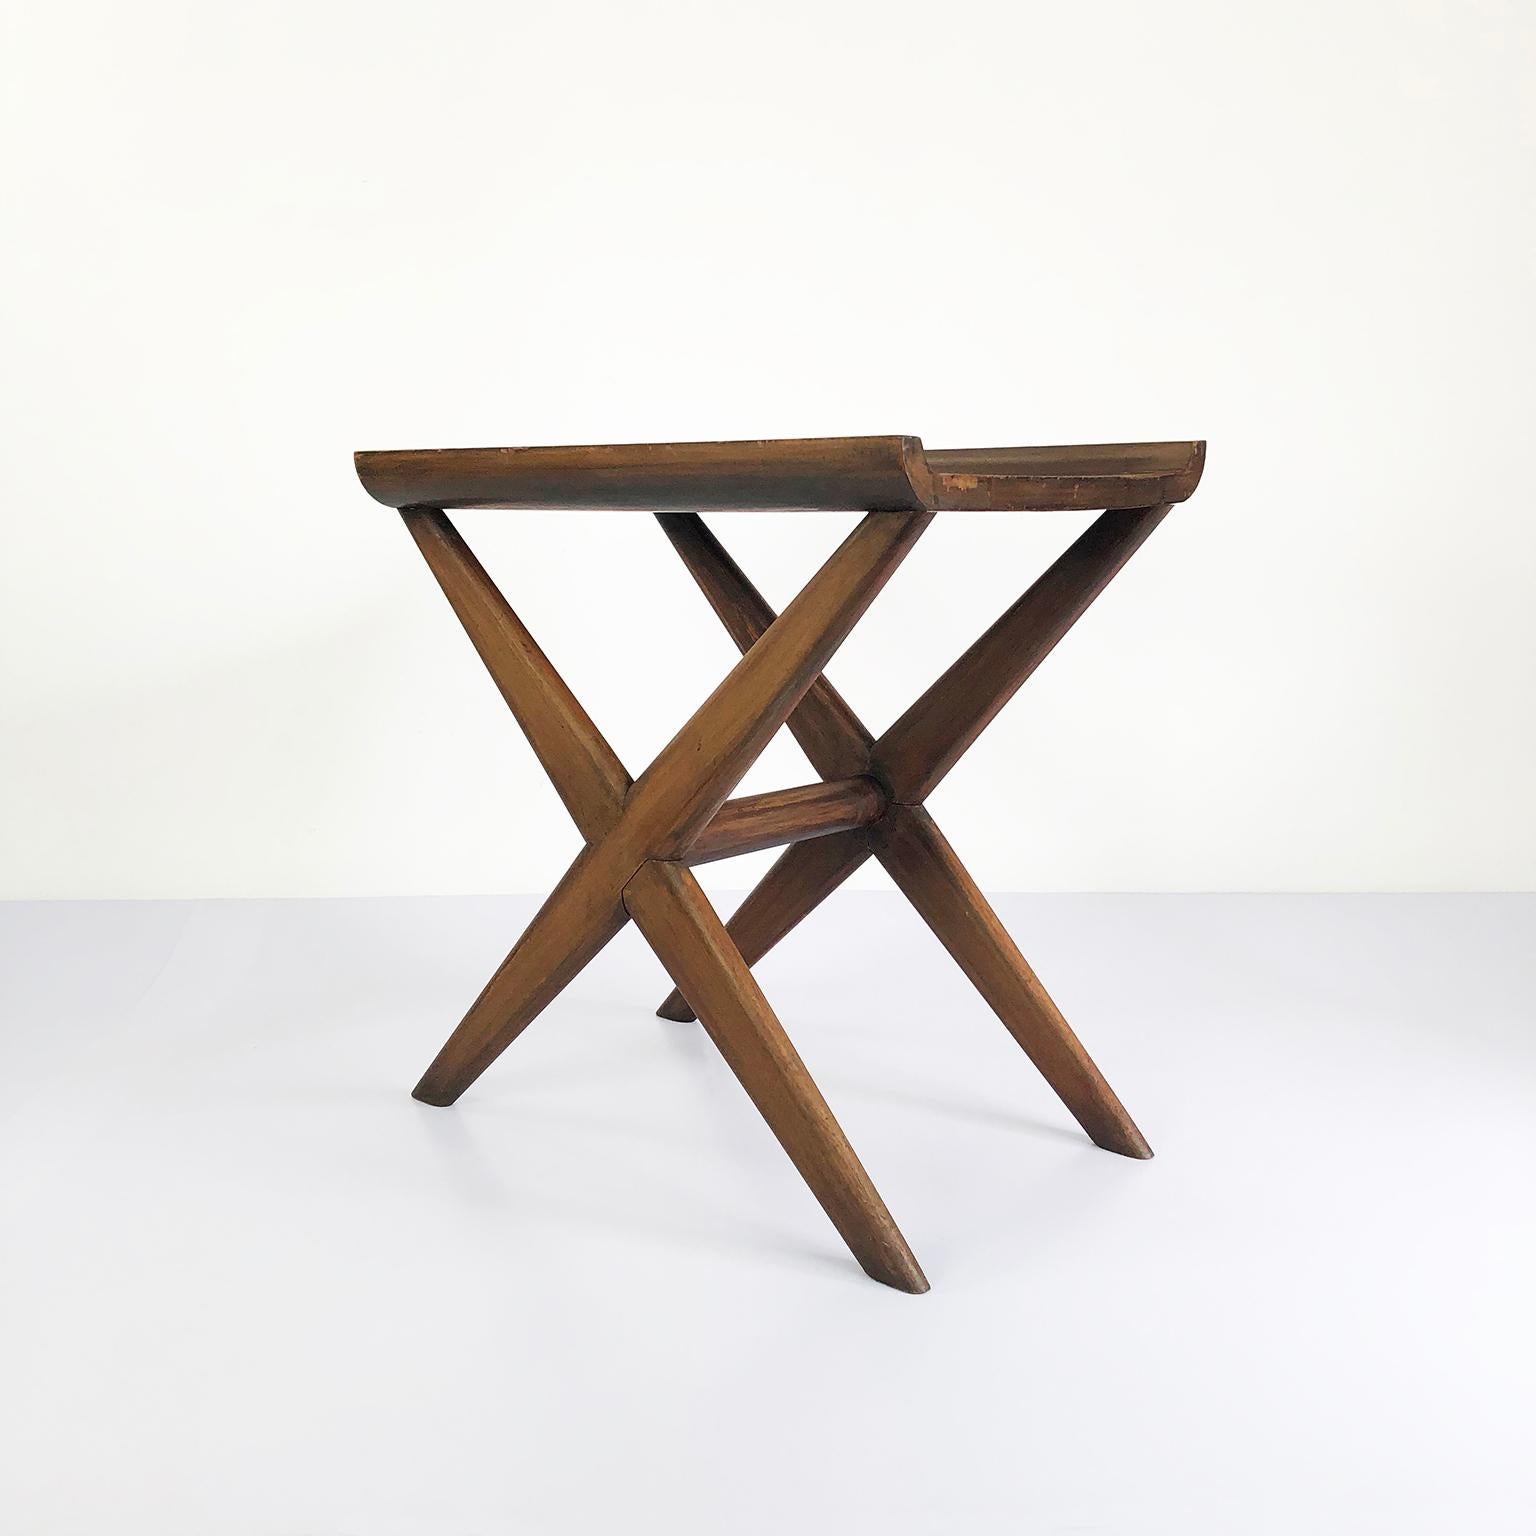 Circa 1950, We offer this rare end table in mahogany wood, the lines and style its similar to Pierre Jeanneret designs.